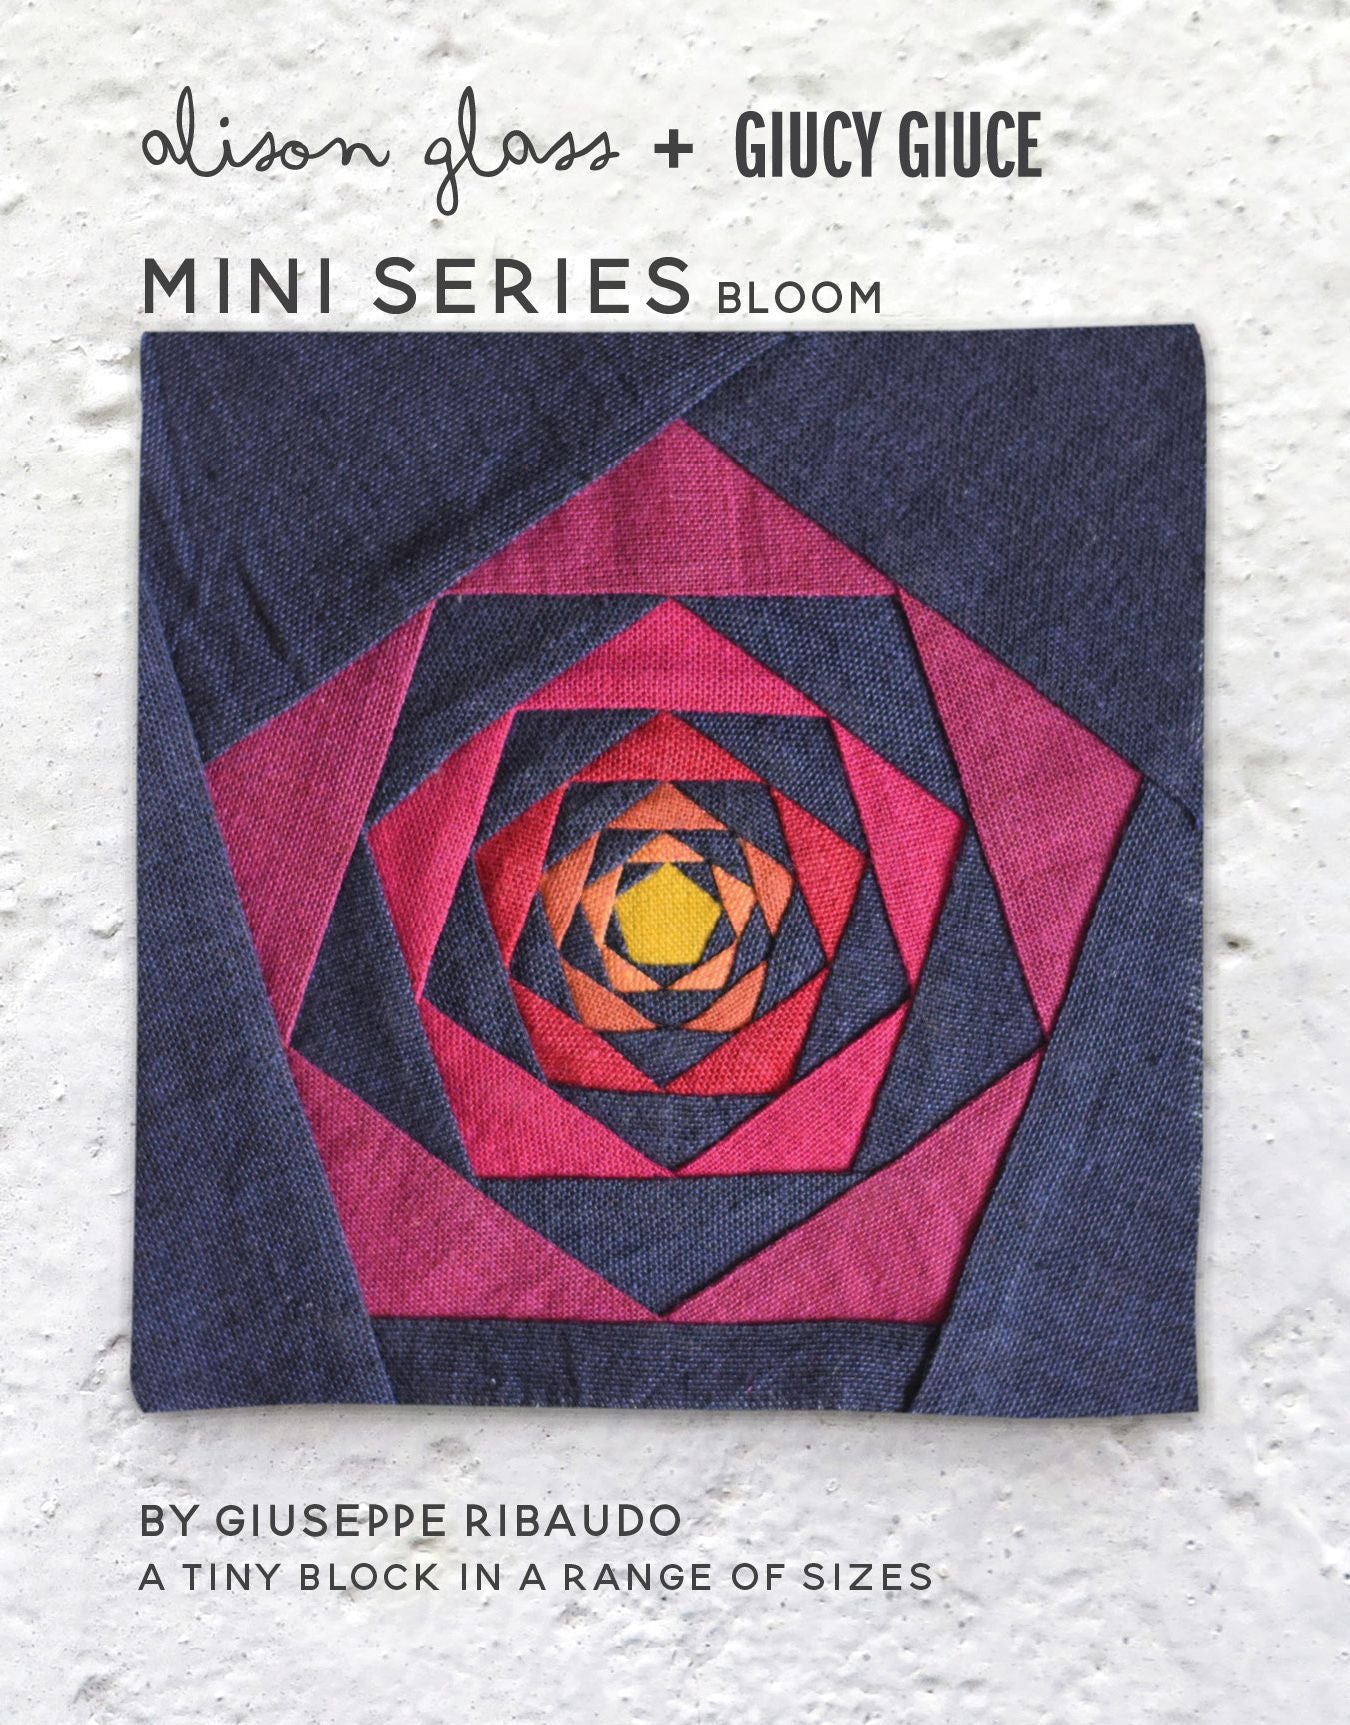 New mini series Bloom echoing flower foundation paper piecing mini block by Alison Glass and Guicy Guice Giuseppe Ribaudo for mini series SAL sewalong quiltalong mullti-colored pineapple style hexagon block 